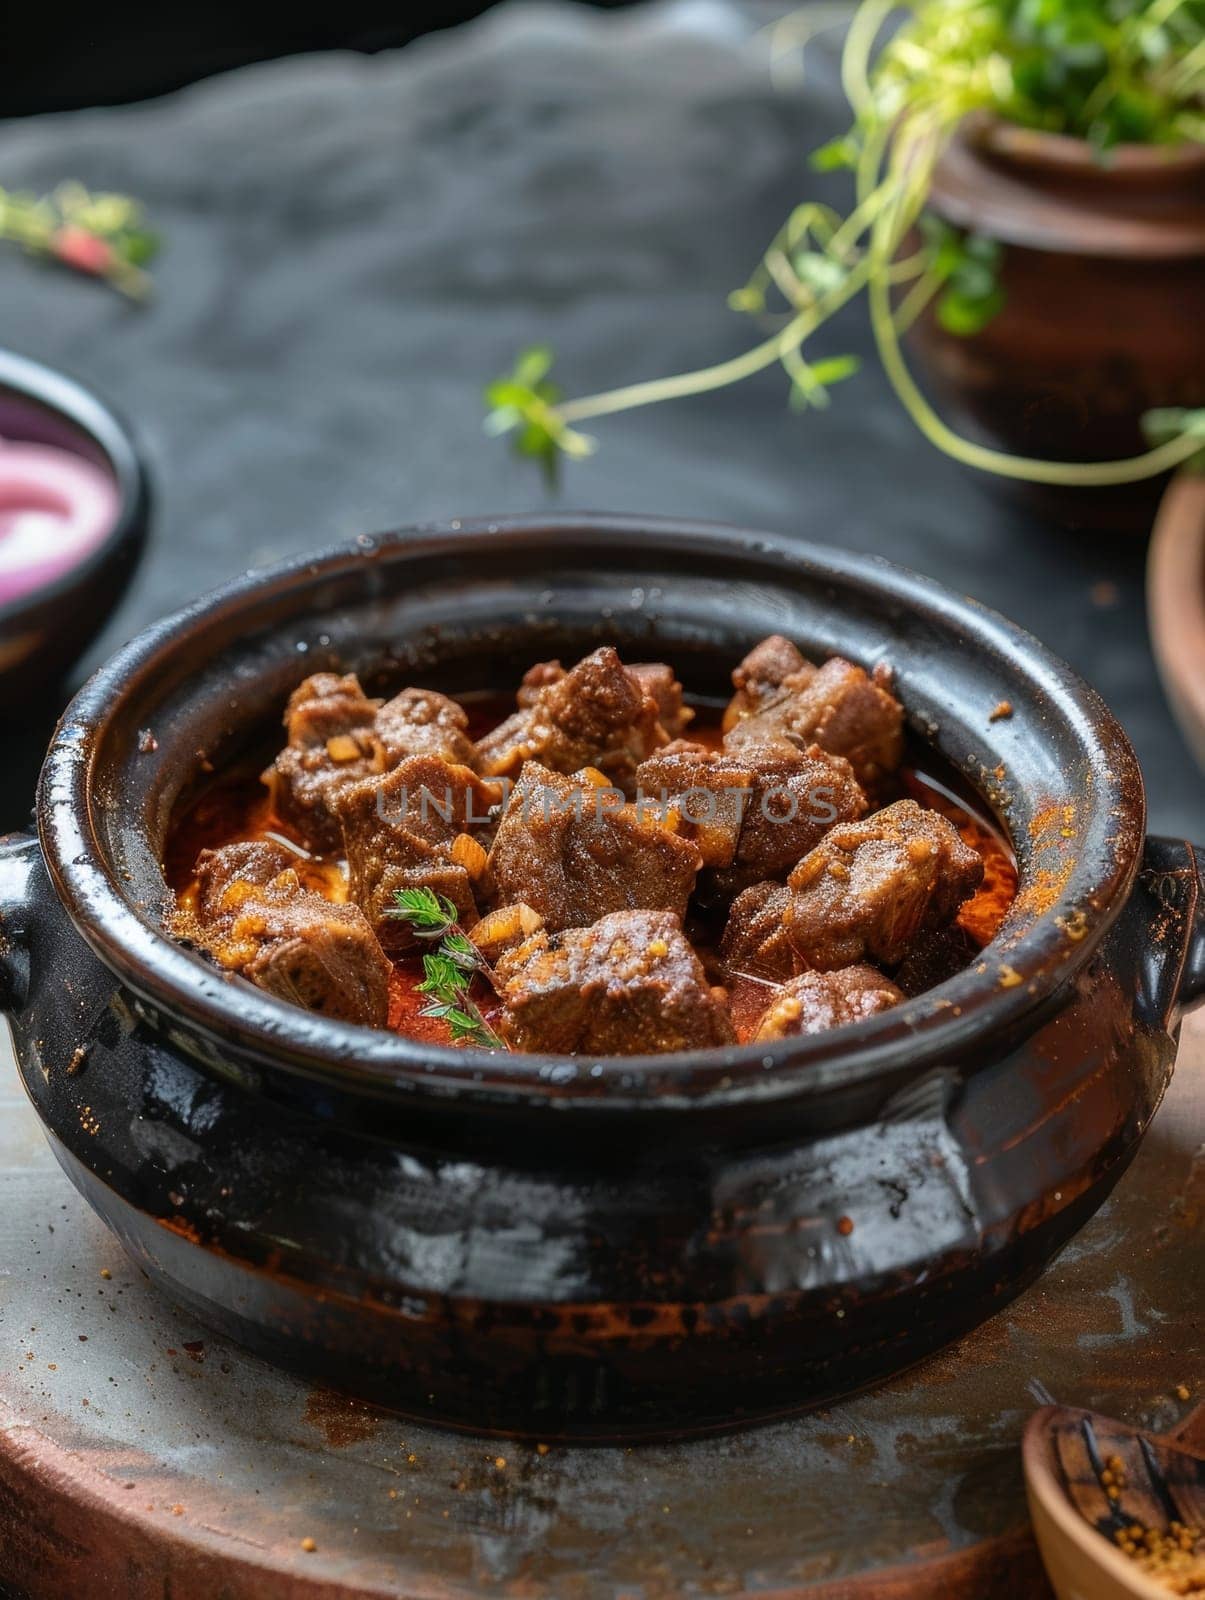 Omani shuwa, slow-roasted lamb marinated in a rich spice blend, served in a traditional serving pot. A traditional and flavorful dish from Oman